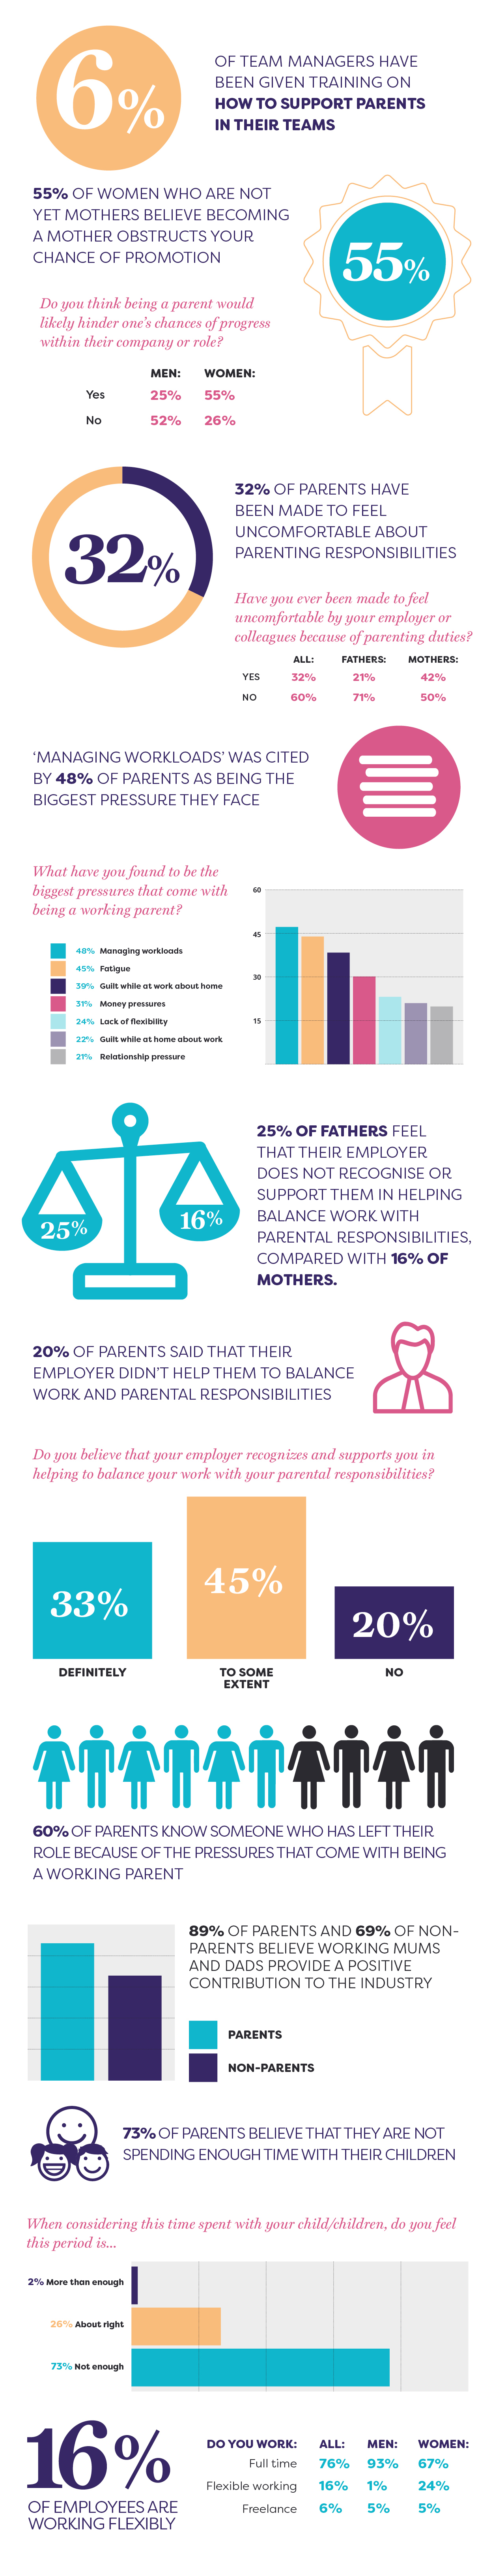 Summary of survey findings infographic 